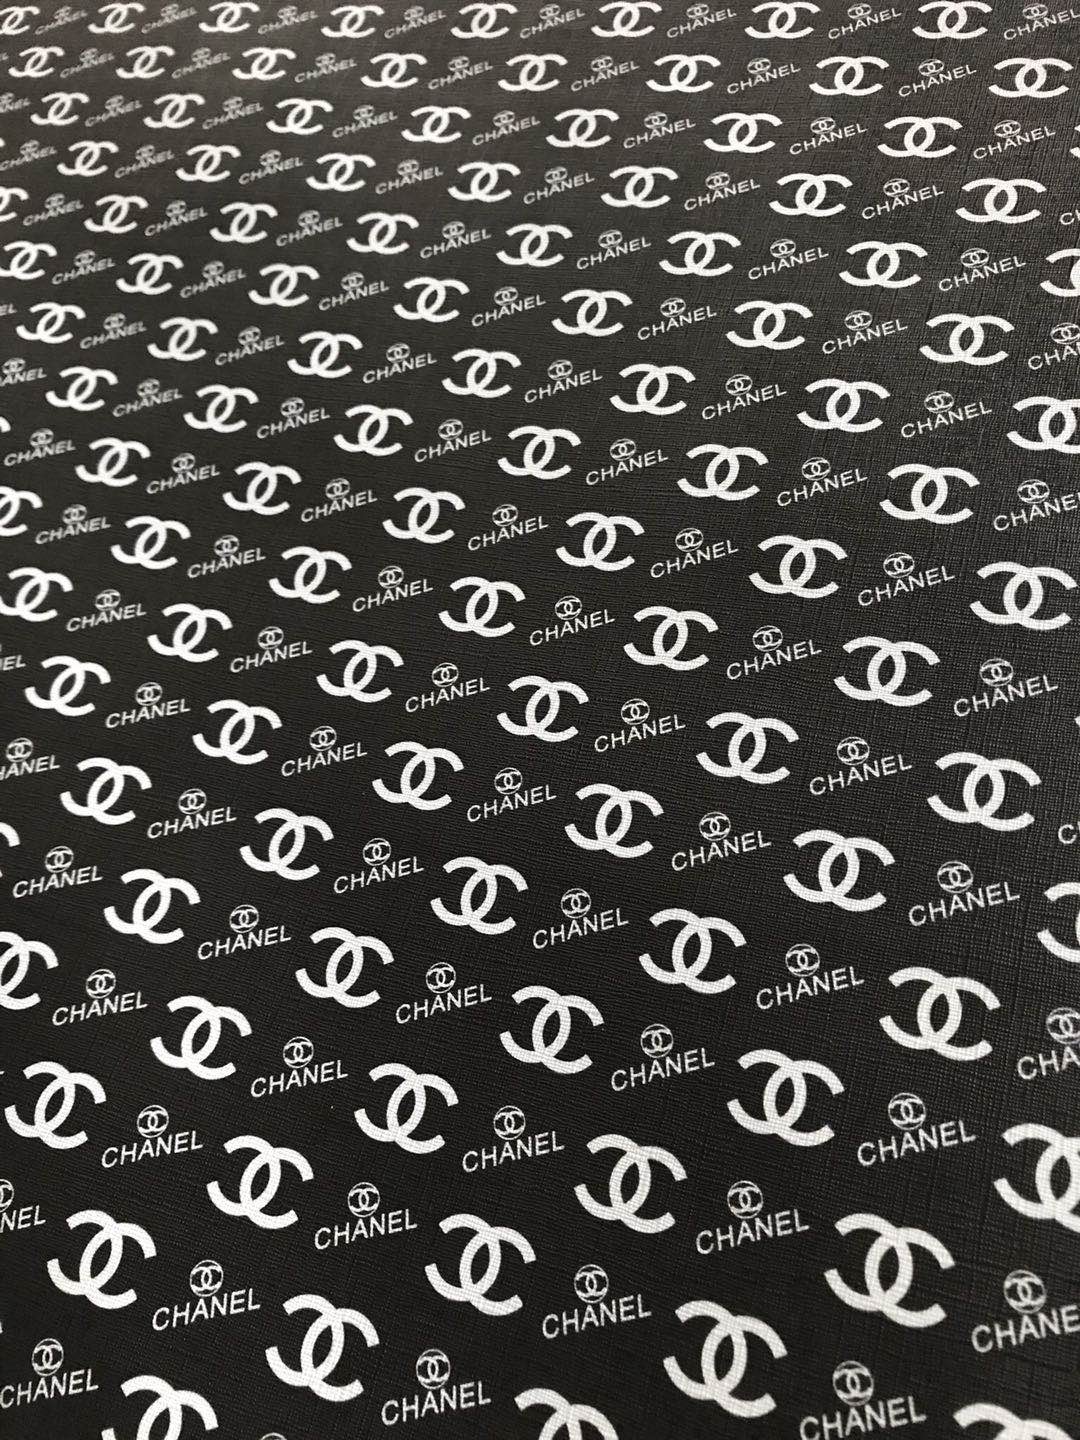 8x11, Chanel Synthetic Leather, Custom Leather Sheets, Designer Brands  Leather, Chanel Logo, White Words on Black, Synthetic Leather Sheet, Faux  Leather, Vinyl, Patent, Glitter, DIY Leather Hair Bows, 1 Sheet - Jennifer's